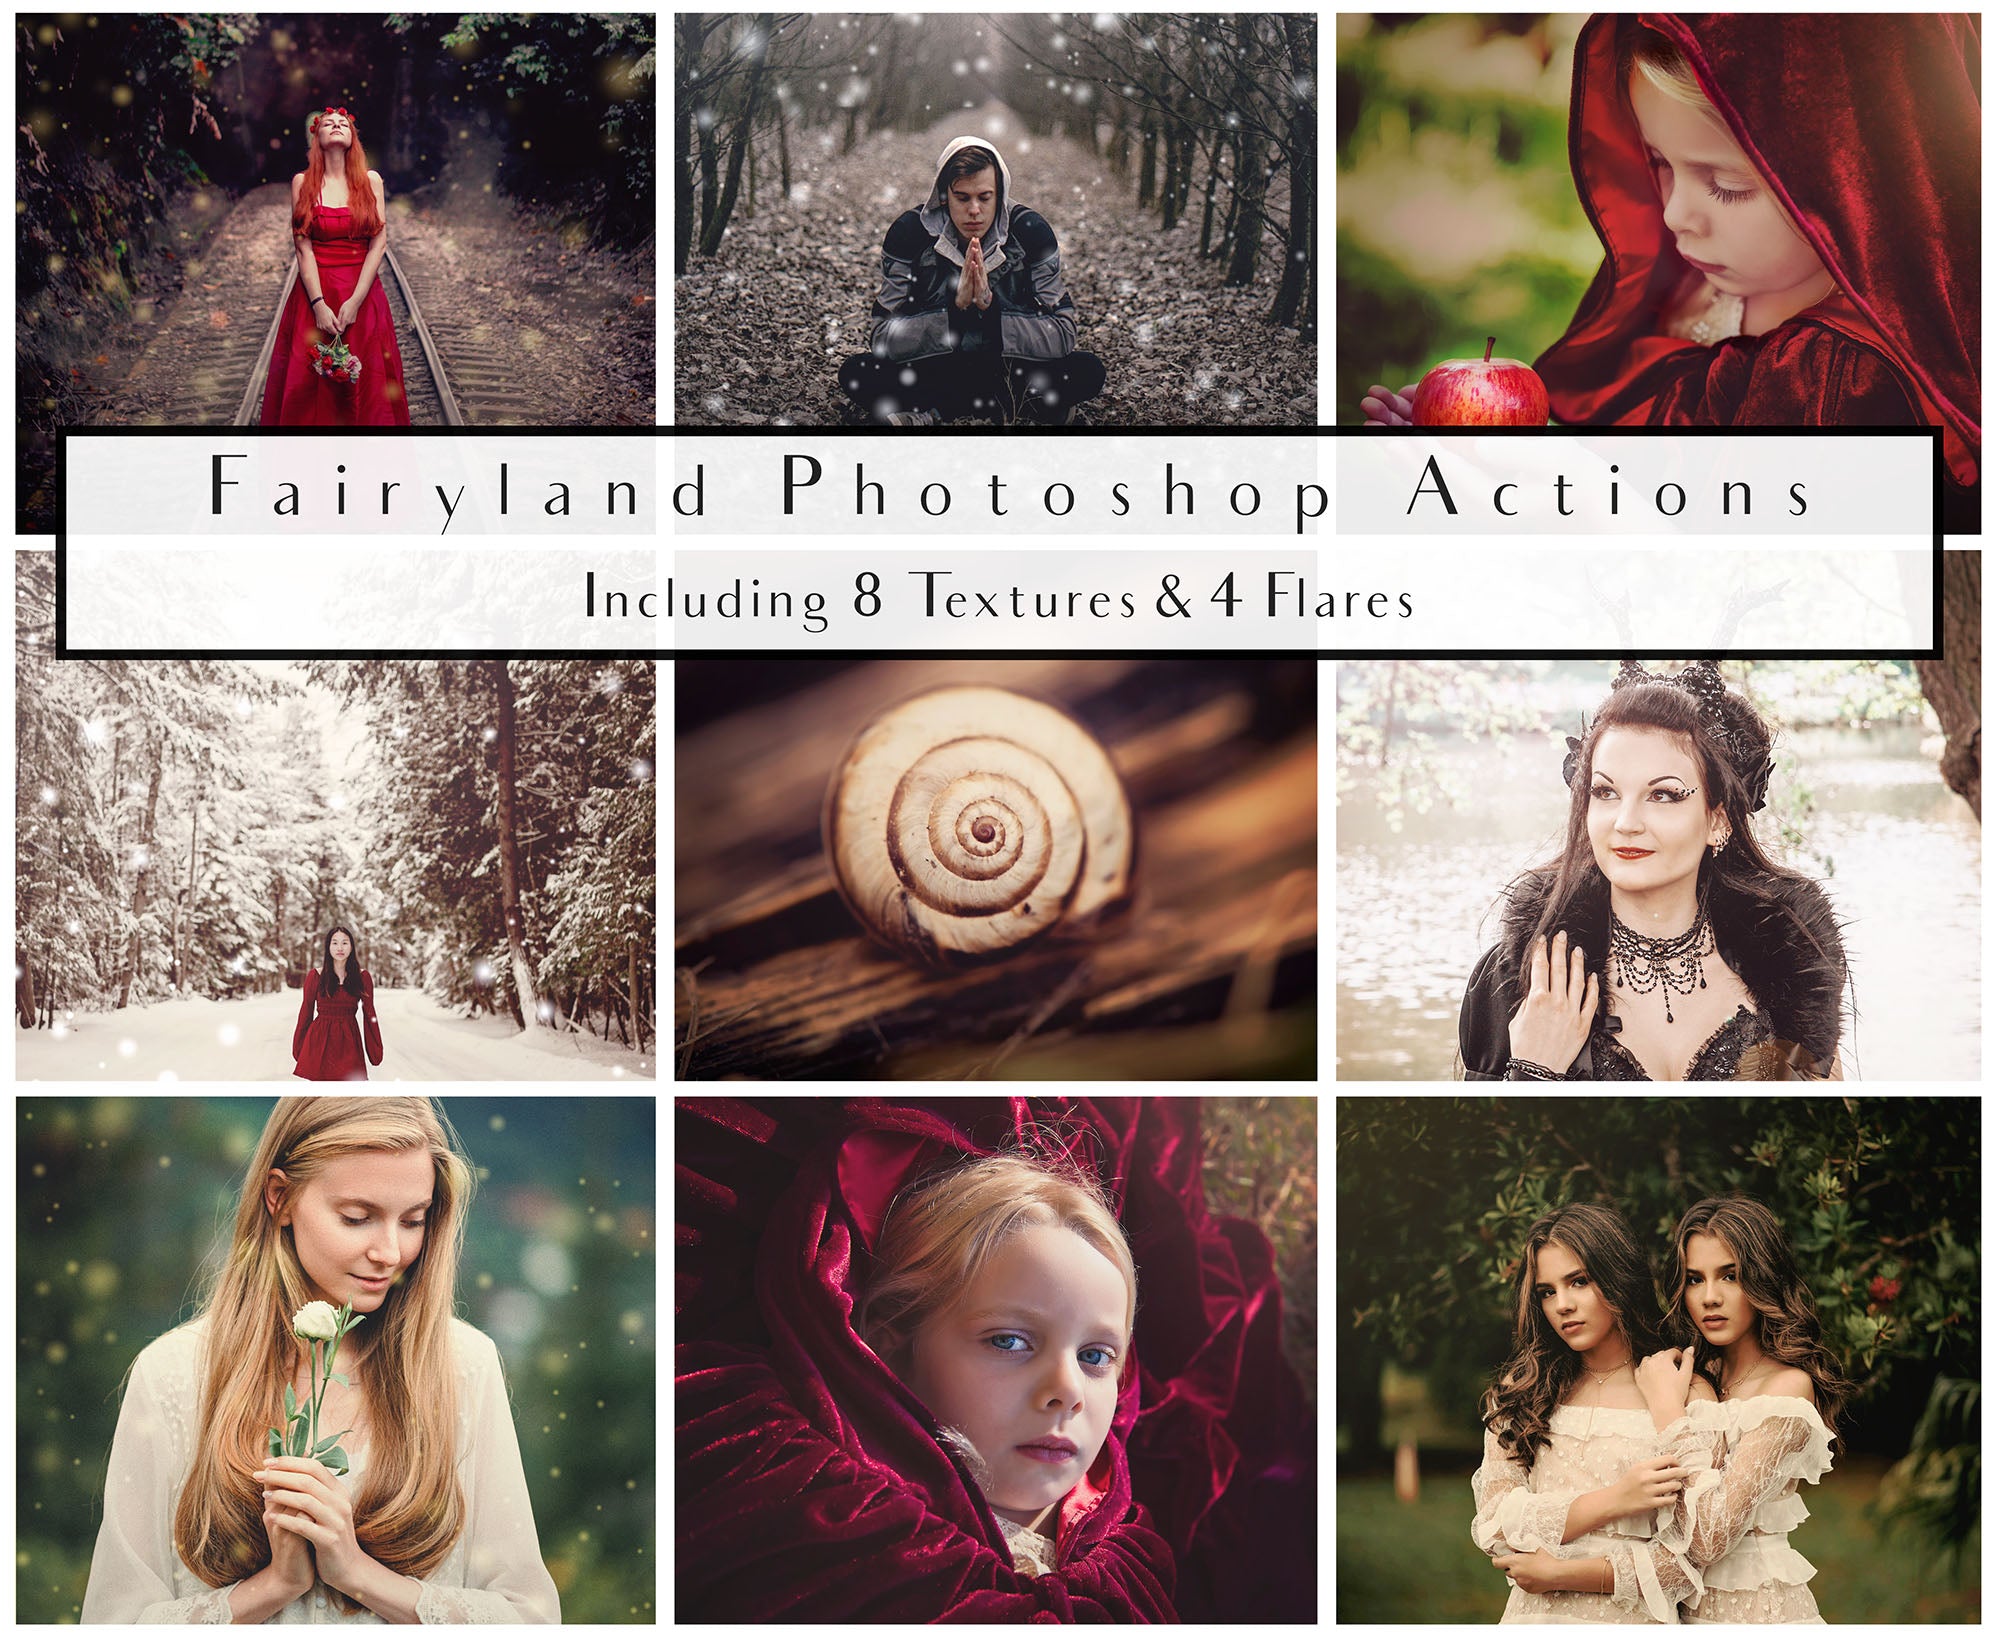 Photoshop Actions for photographers. Edit your images & speed up your work flow. Quality actions for photography.